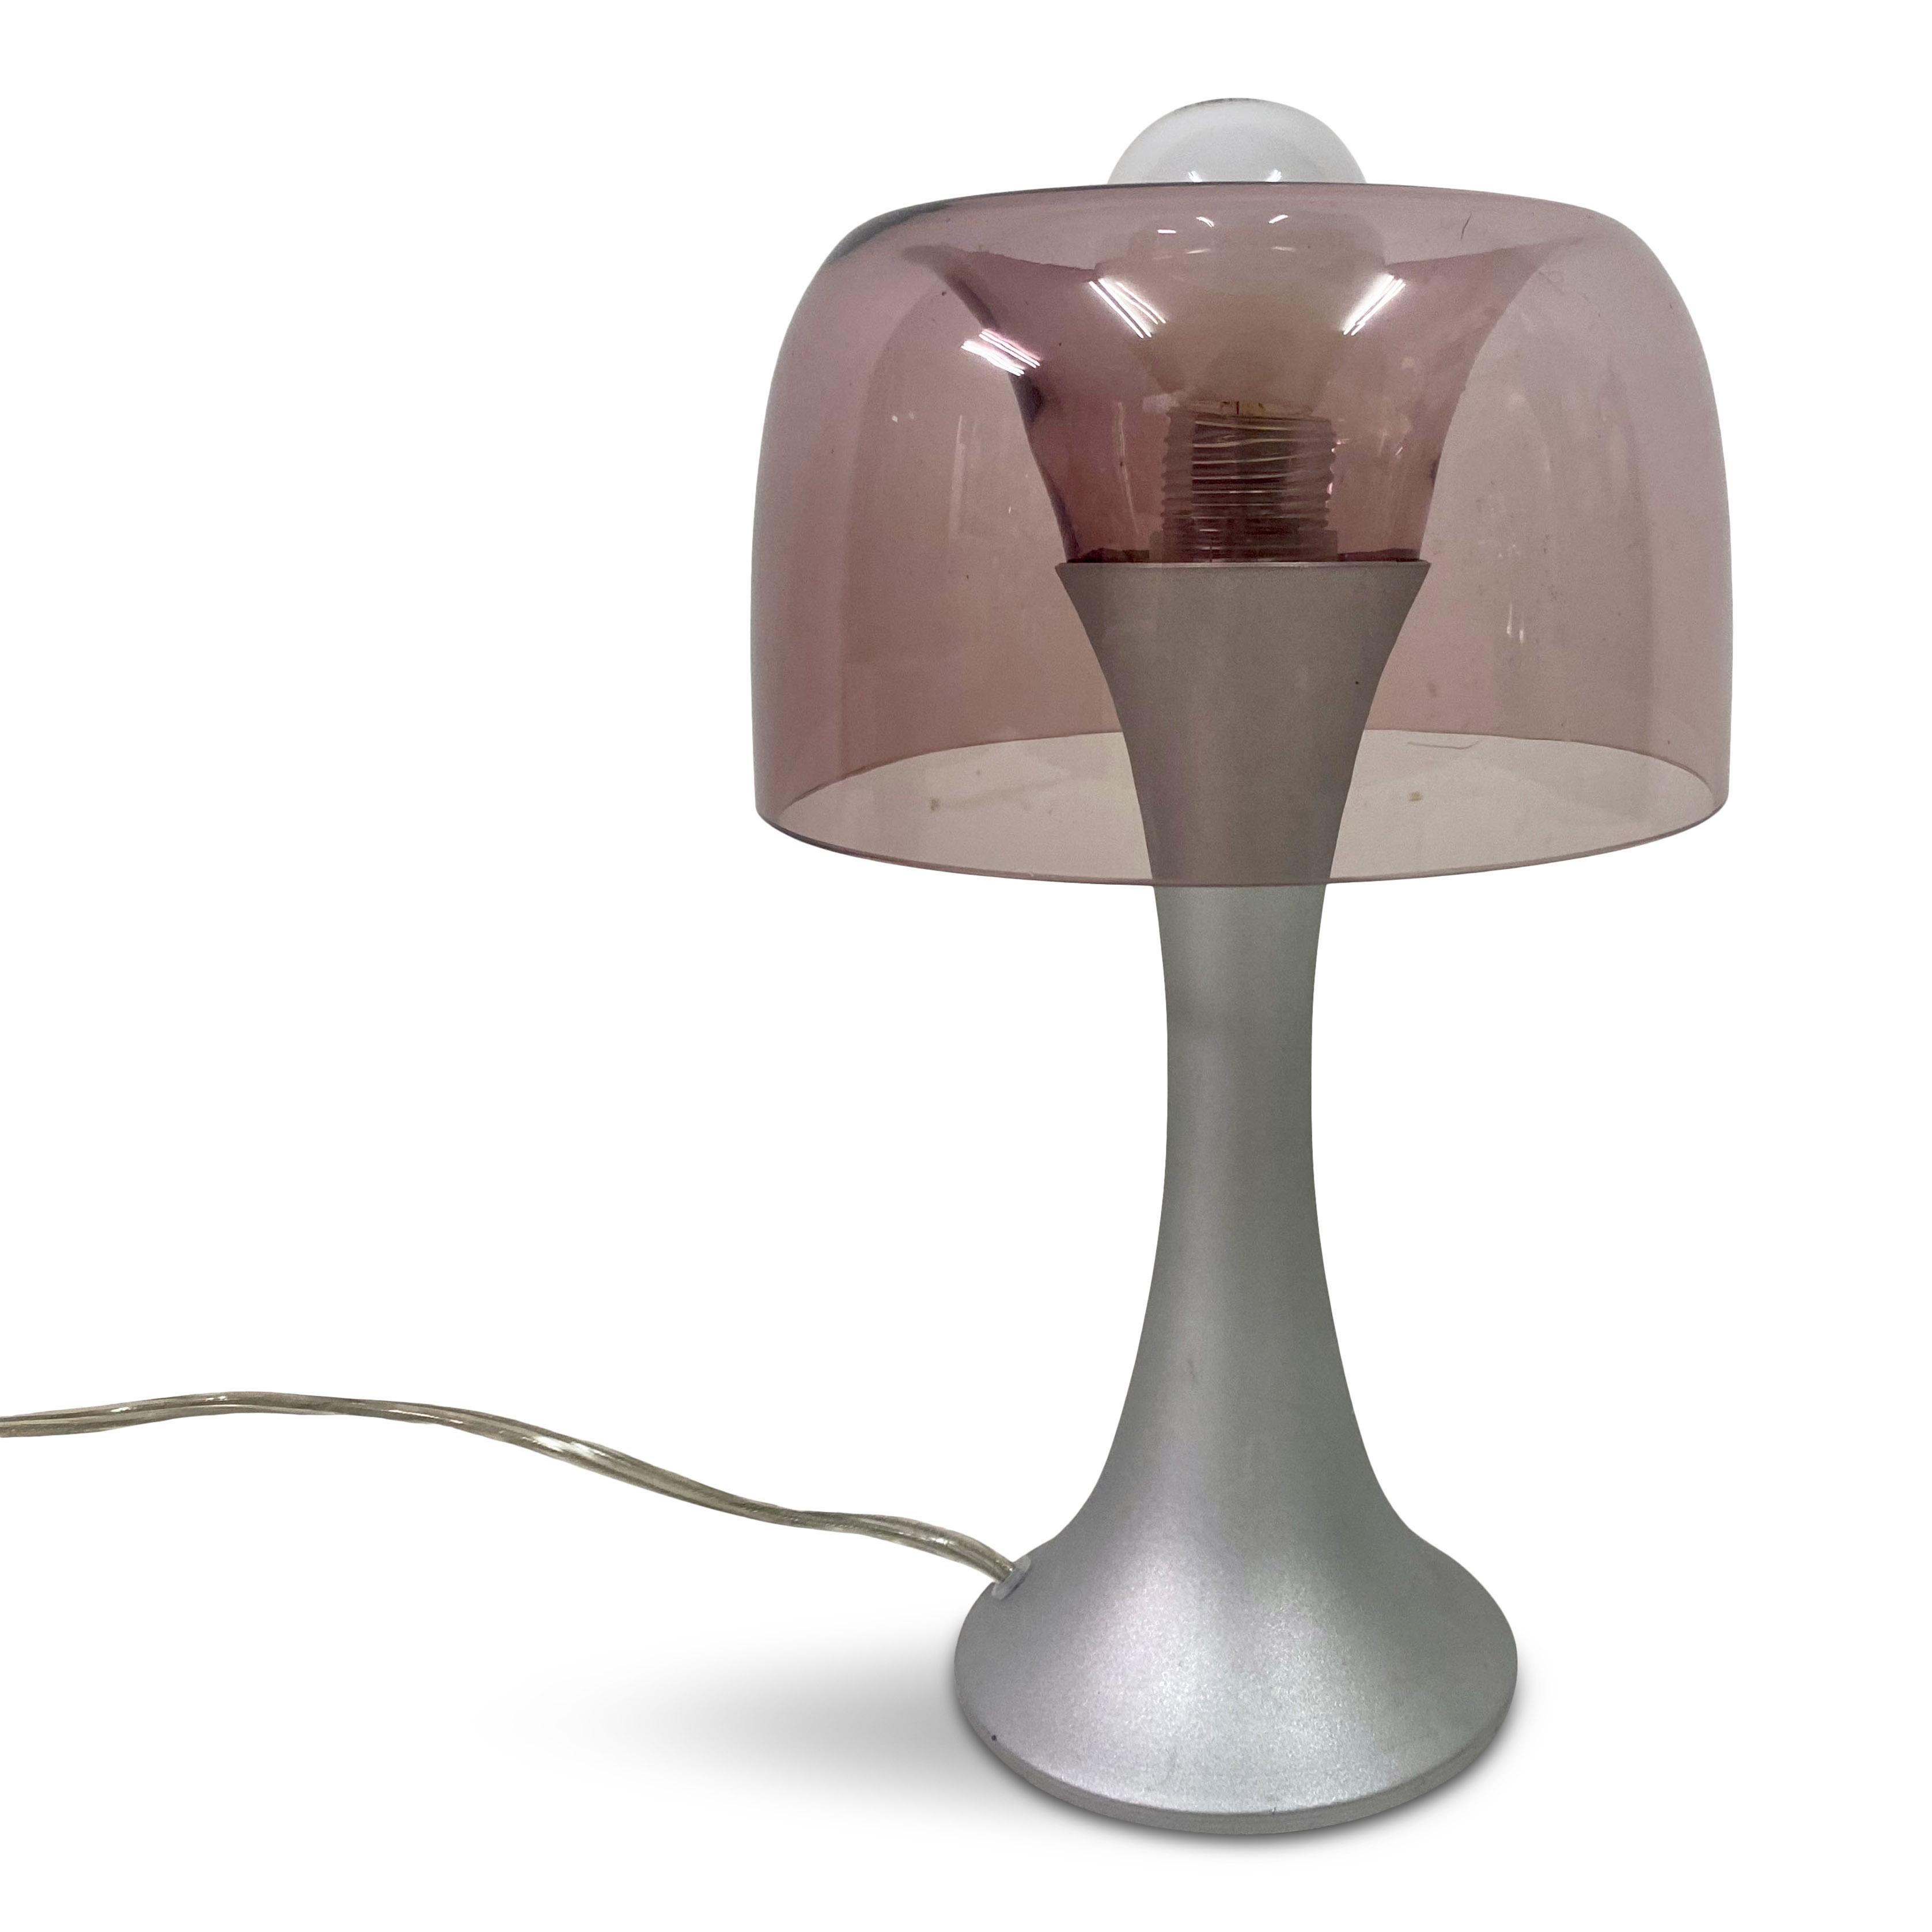 Amélie table lamp

Designed by Harry and Camila for Fontana Arte

Spun aluminium base

Hand blown glass diffuser 

Made in 2002

Italy.
   